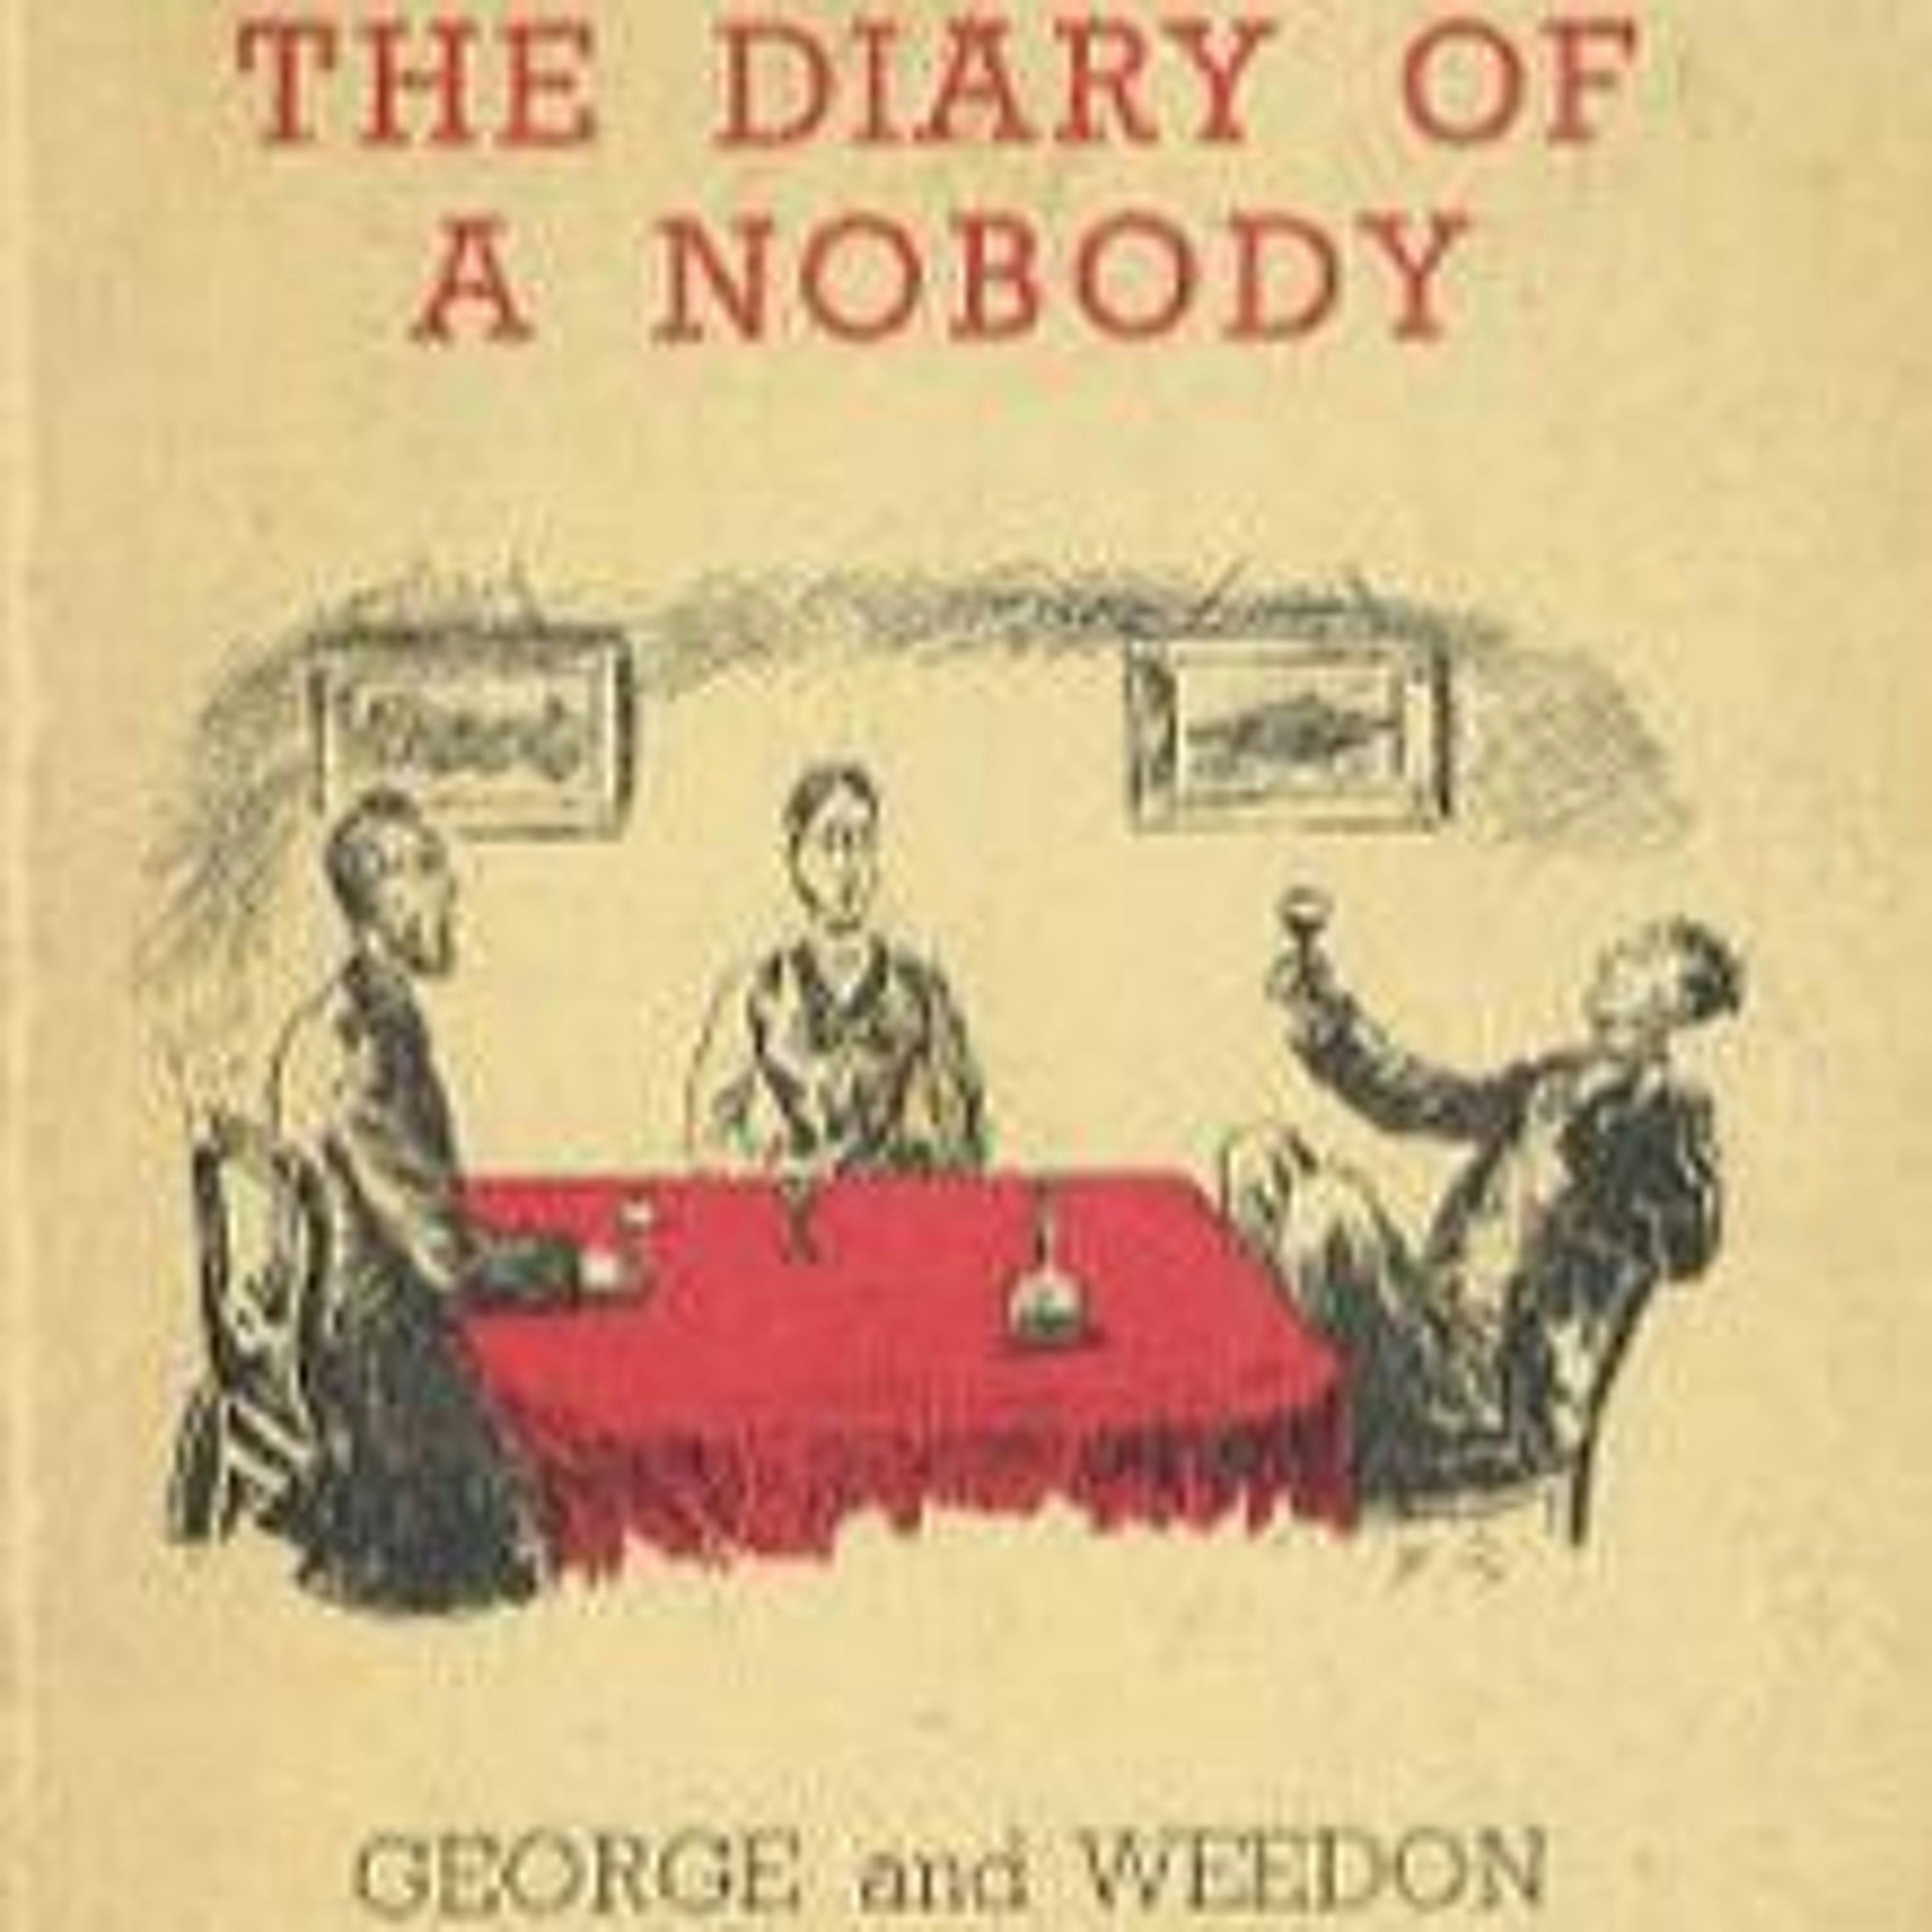 The Diary of a Nobody by George and Weedon Grossmith